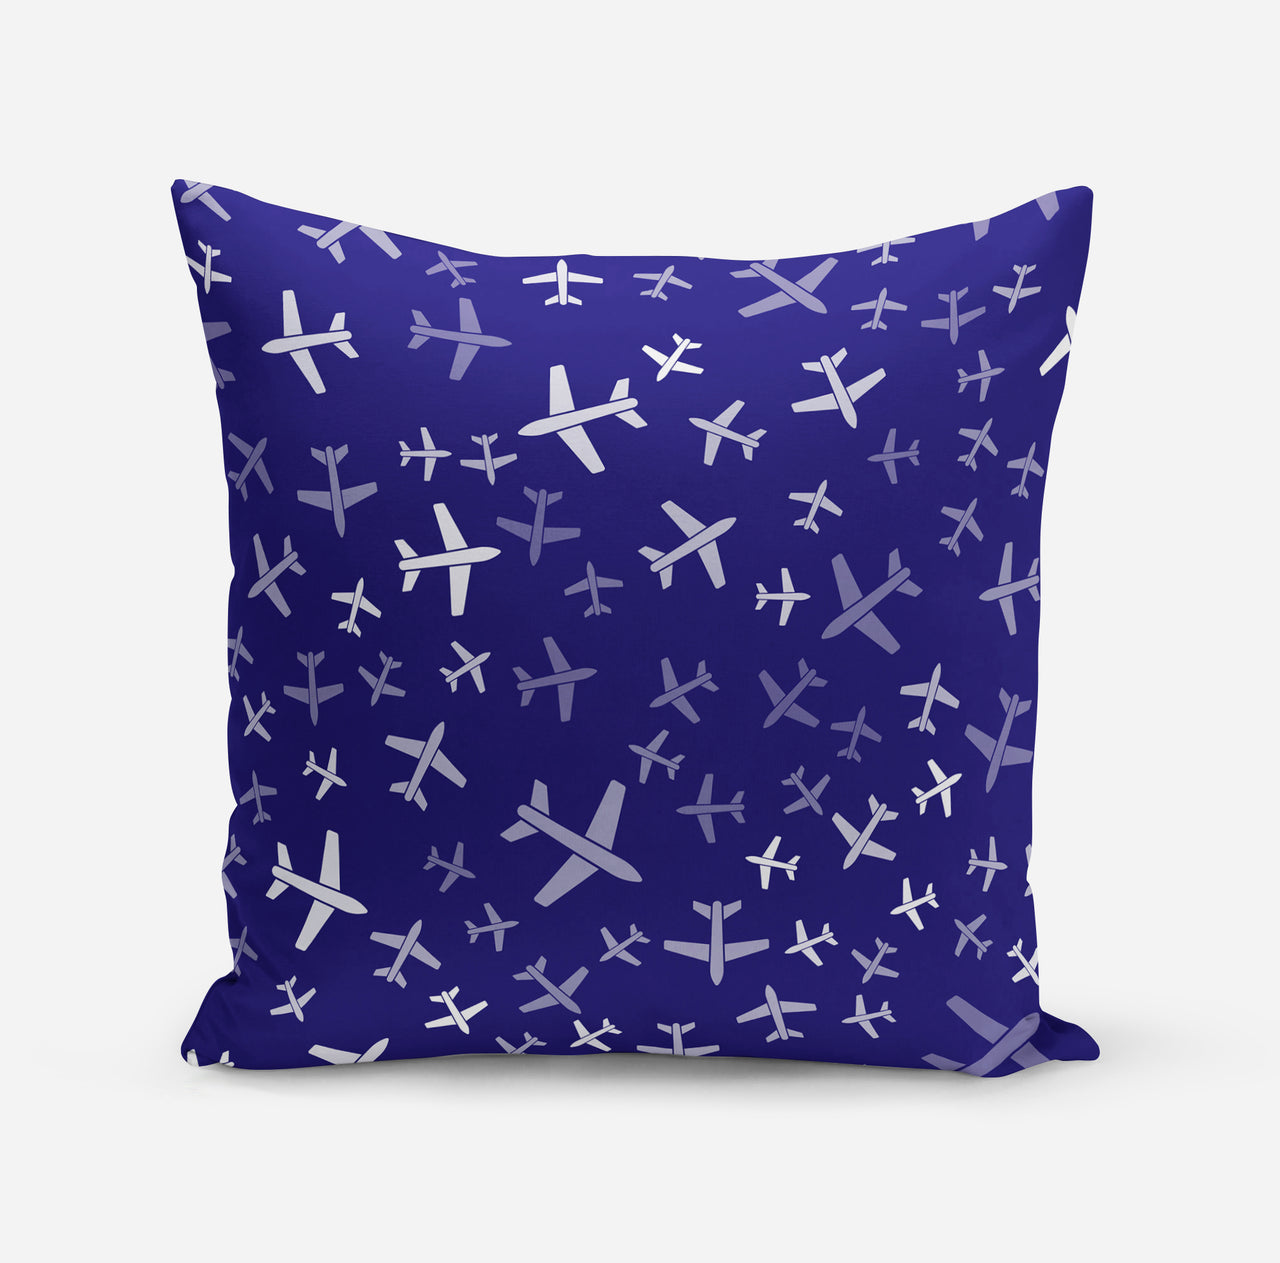 Different Sizes Seamless Airplanes Designed Pillows